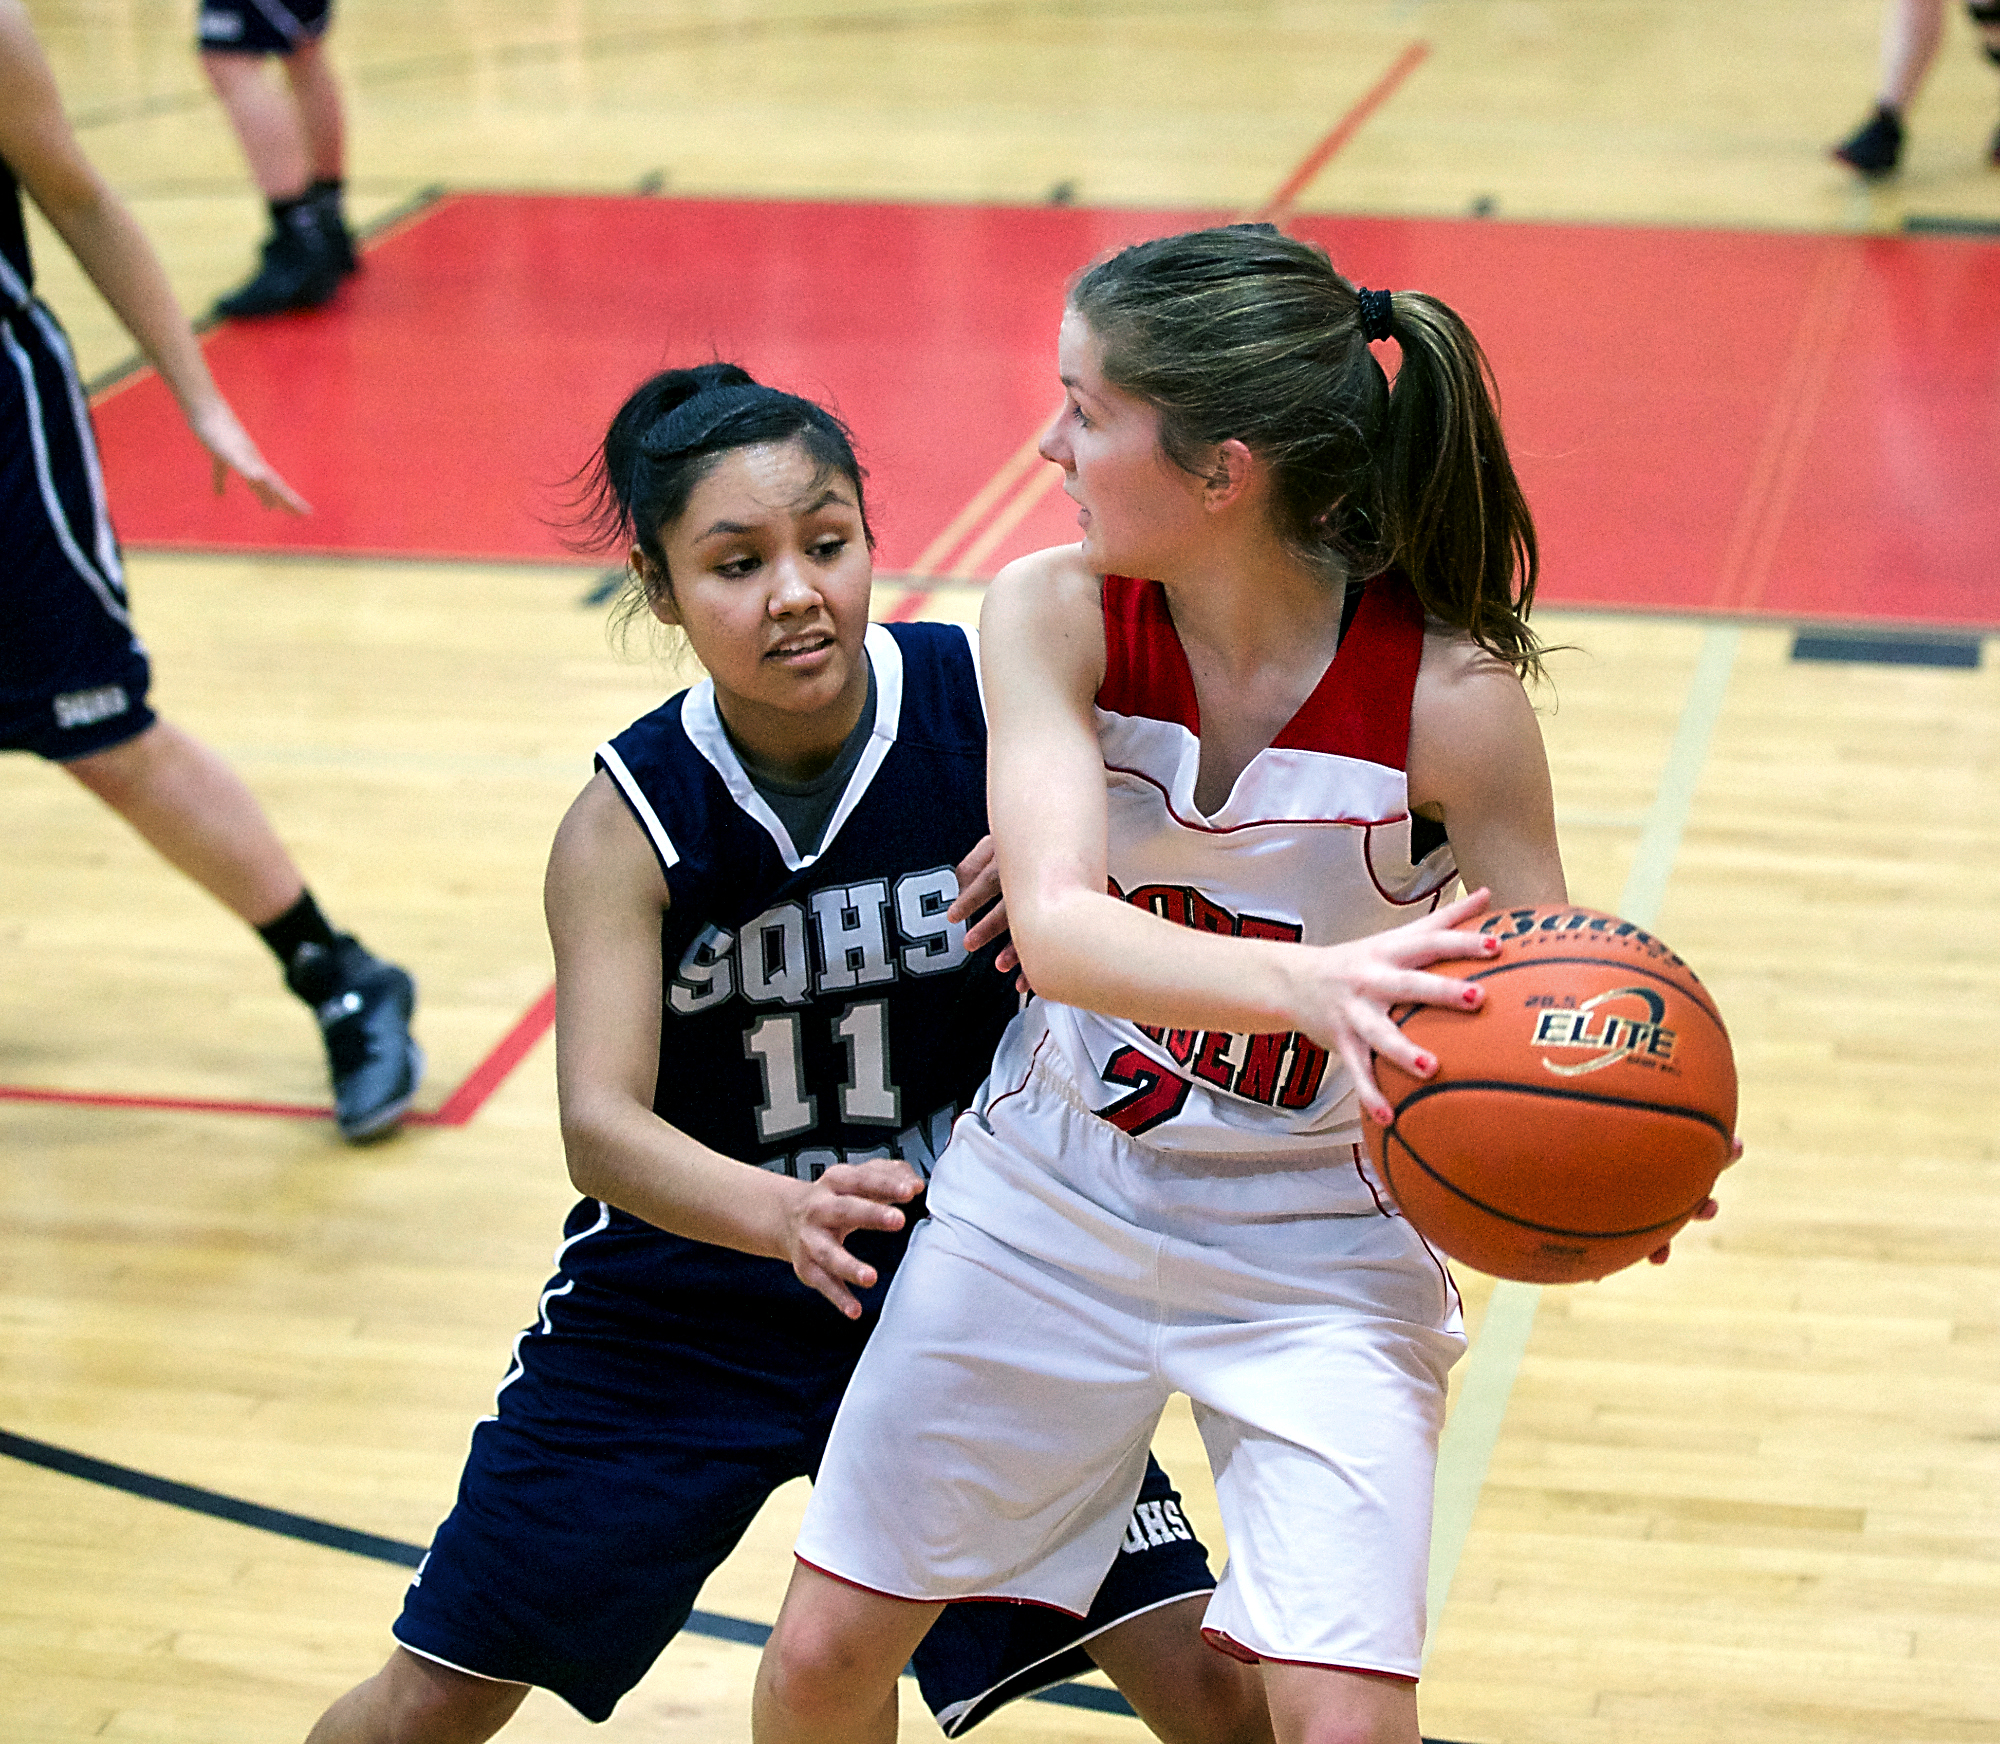 Port Townsend's Jewel Johnson keeps the ball away from Squalicum's Kamea Pino during a Crush in the Slush matchup. Steve Mullensky/for Peninsula Daily News